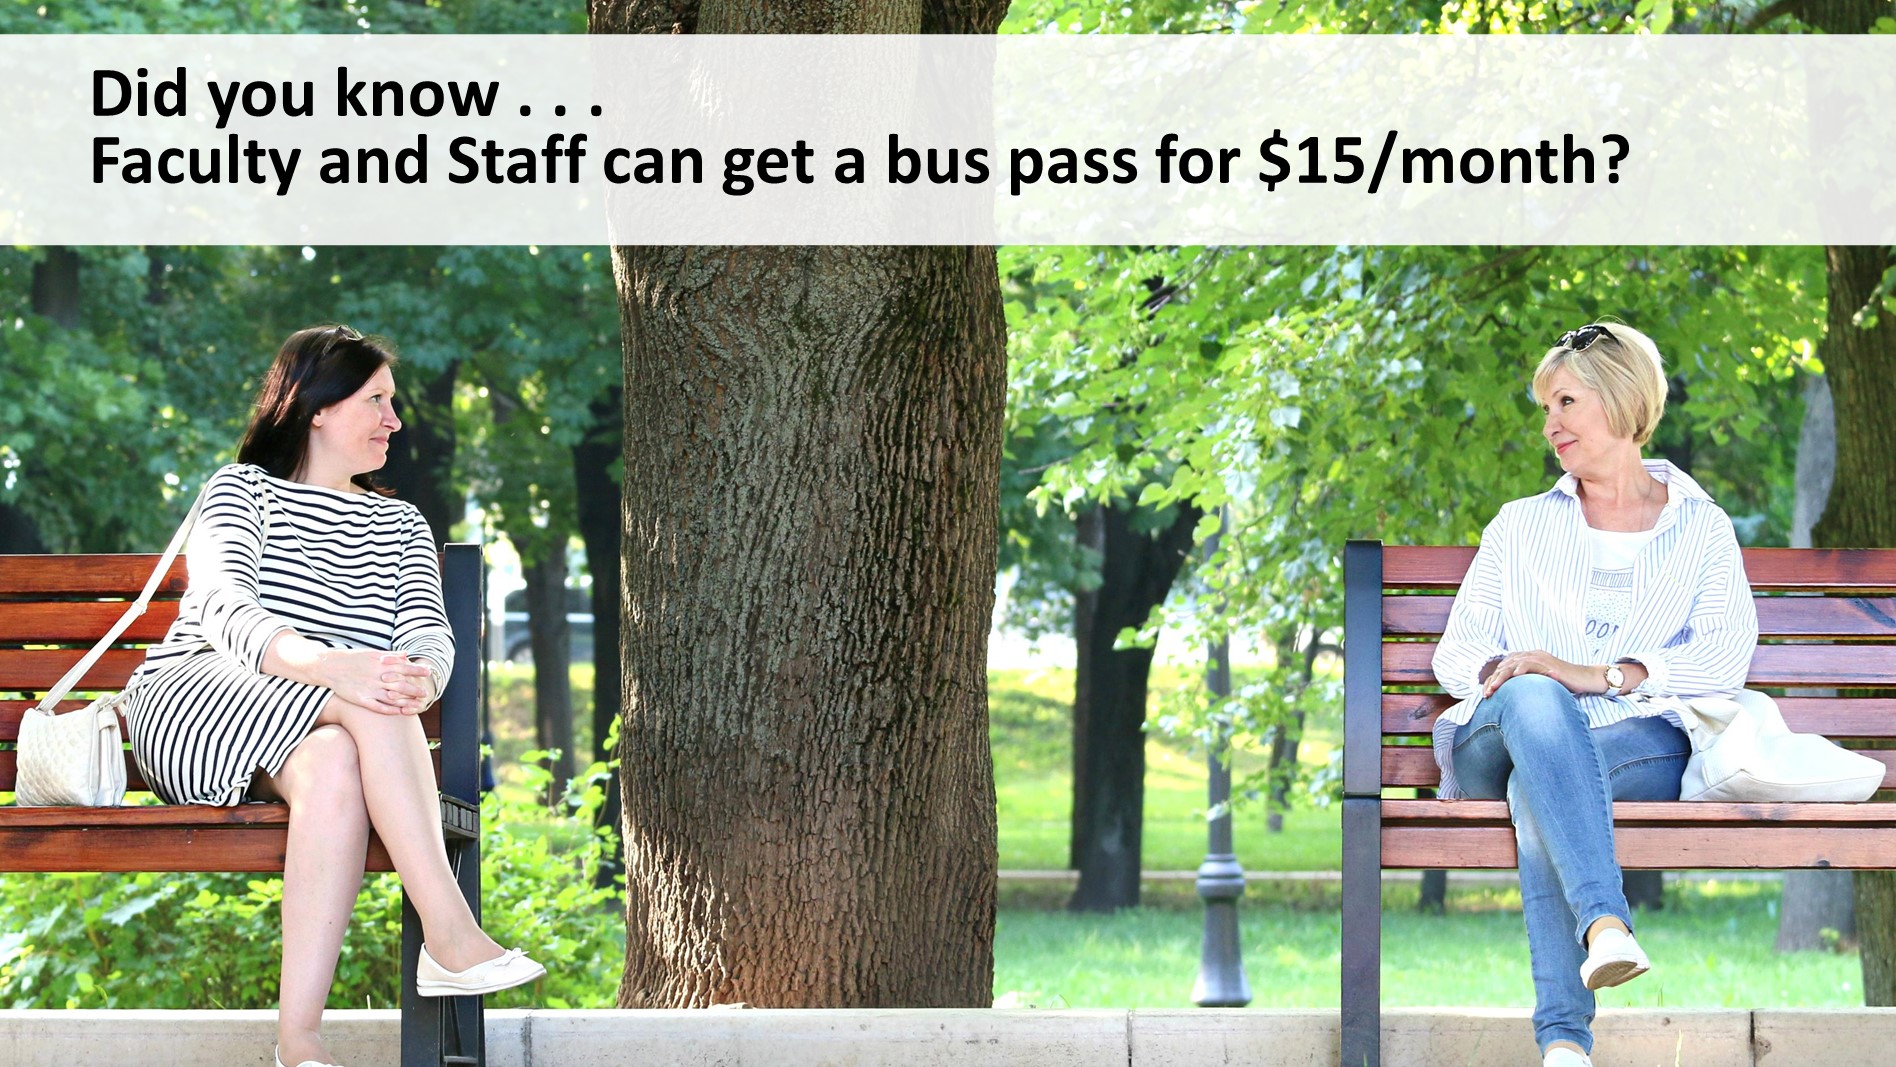 Employe bus pass for $15 per month